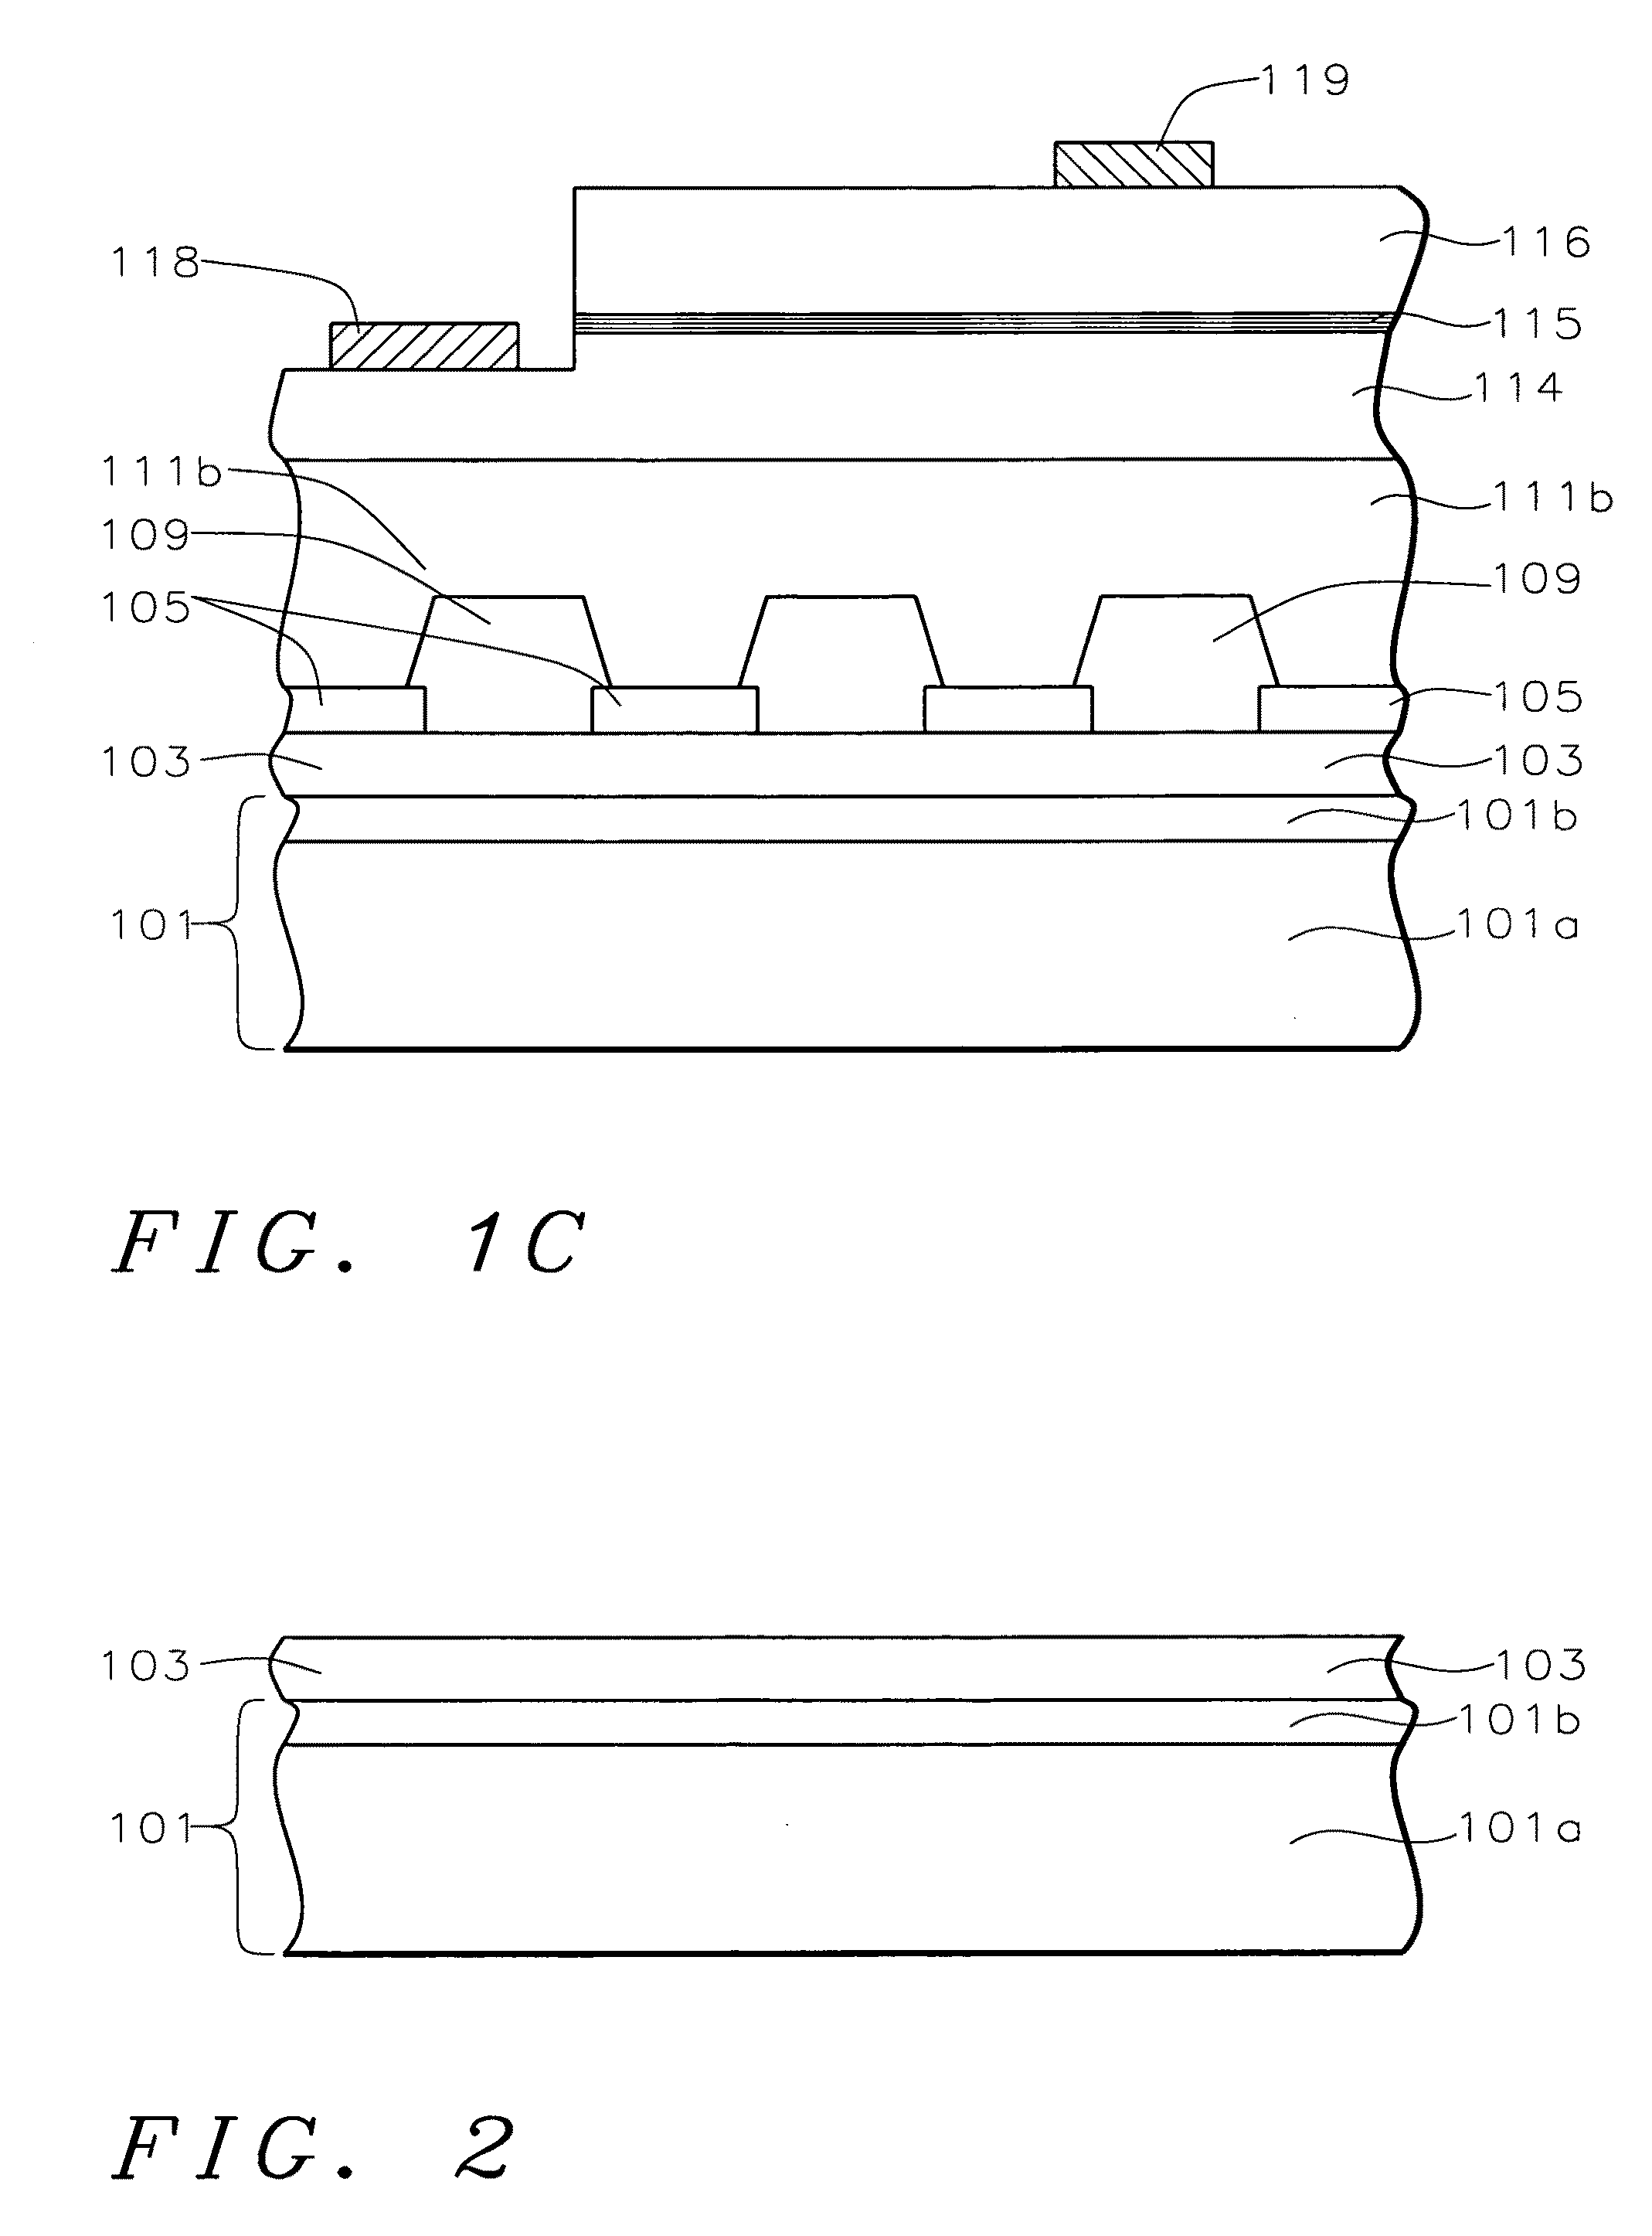 Method of zinc oxide film grown on the epitaxial lateral overgrowth gallium nitride template